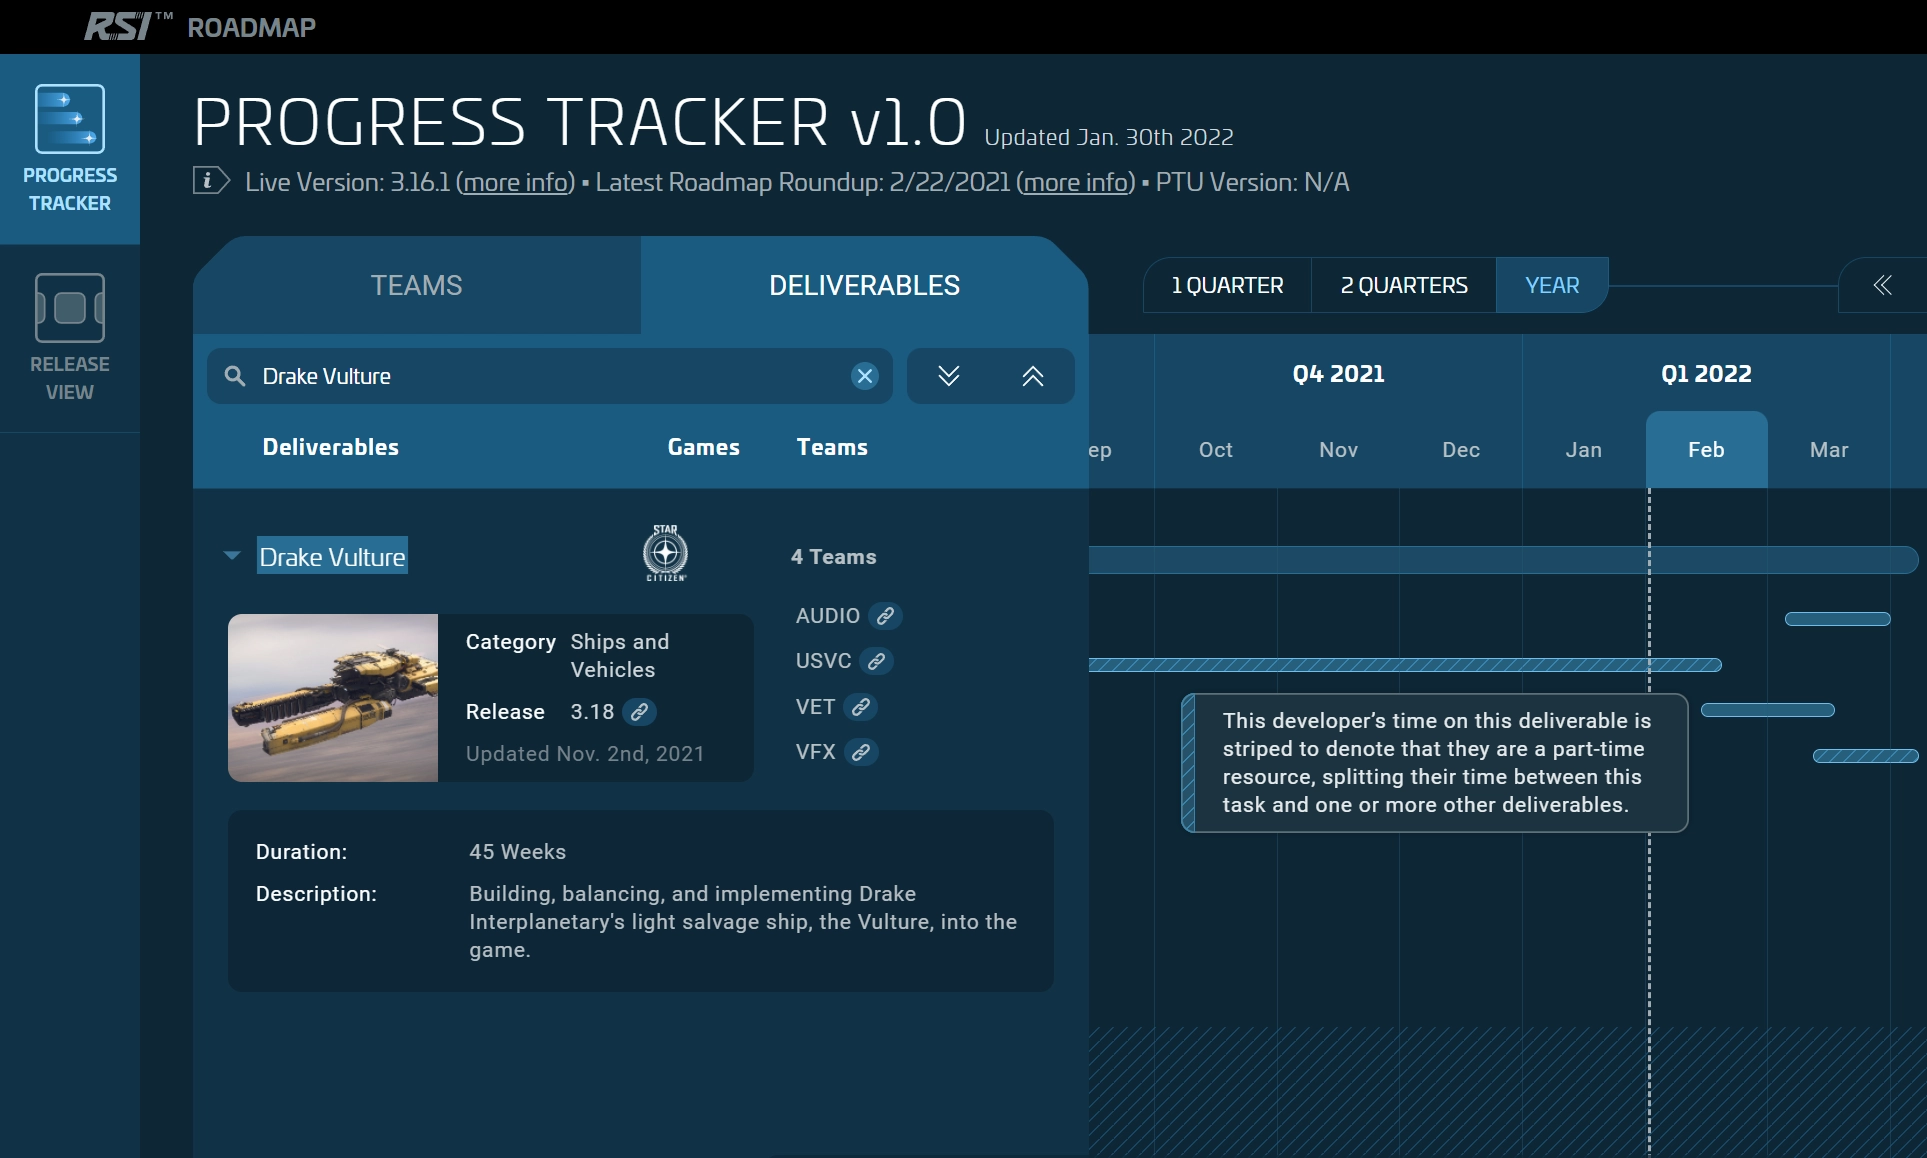 A Deliverable on Progress Tracker expanded to show details